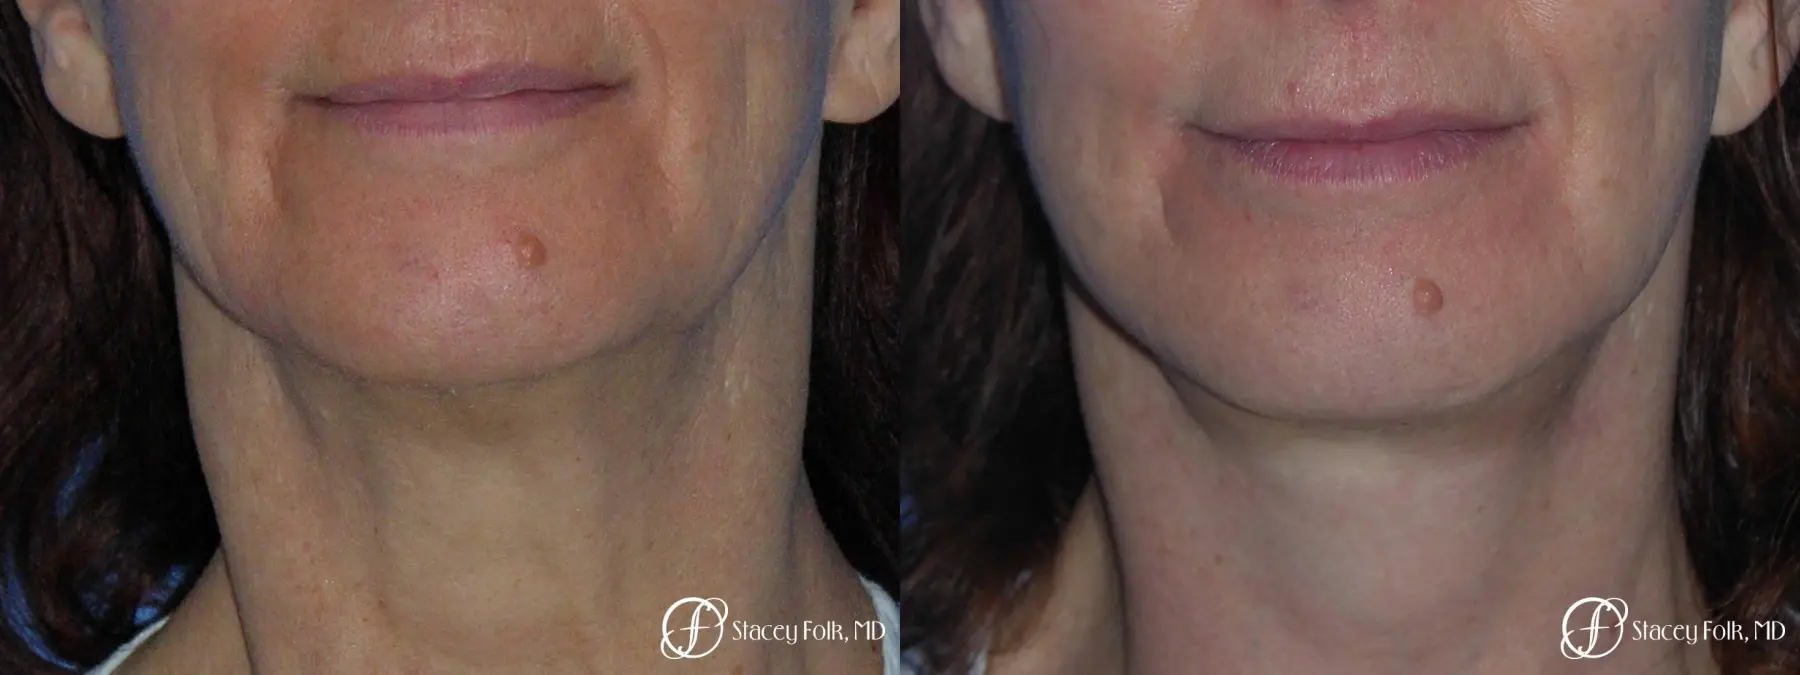 Denver Facial Rejuvenation Face Lift and Fat Injection 7124 - Before and After 1